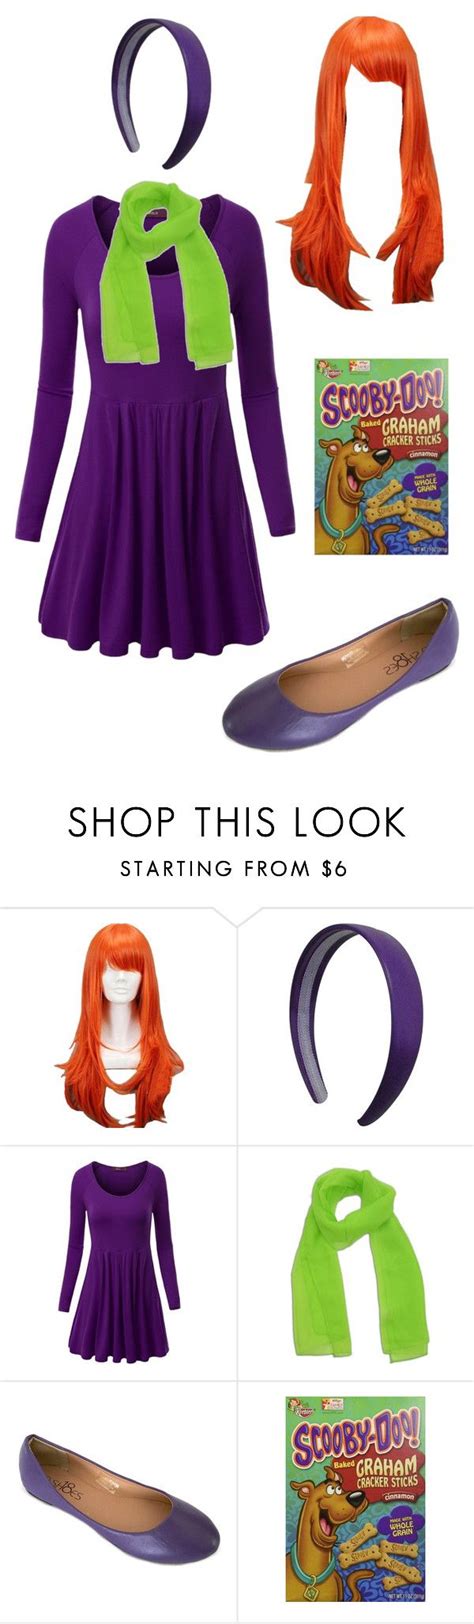 Daphne's signature look has long sleeves and a short skirt. The 25+ best Daphne costume ideas on Pinterest | Daphne from scooby doo, Scooby doo costumes and ...